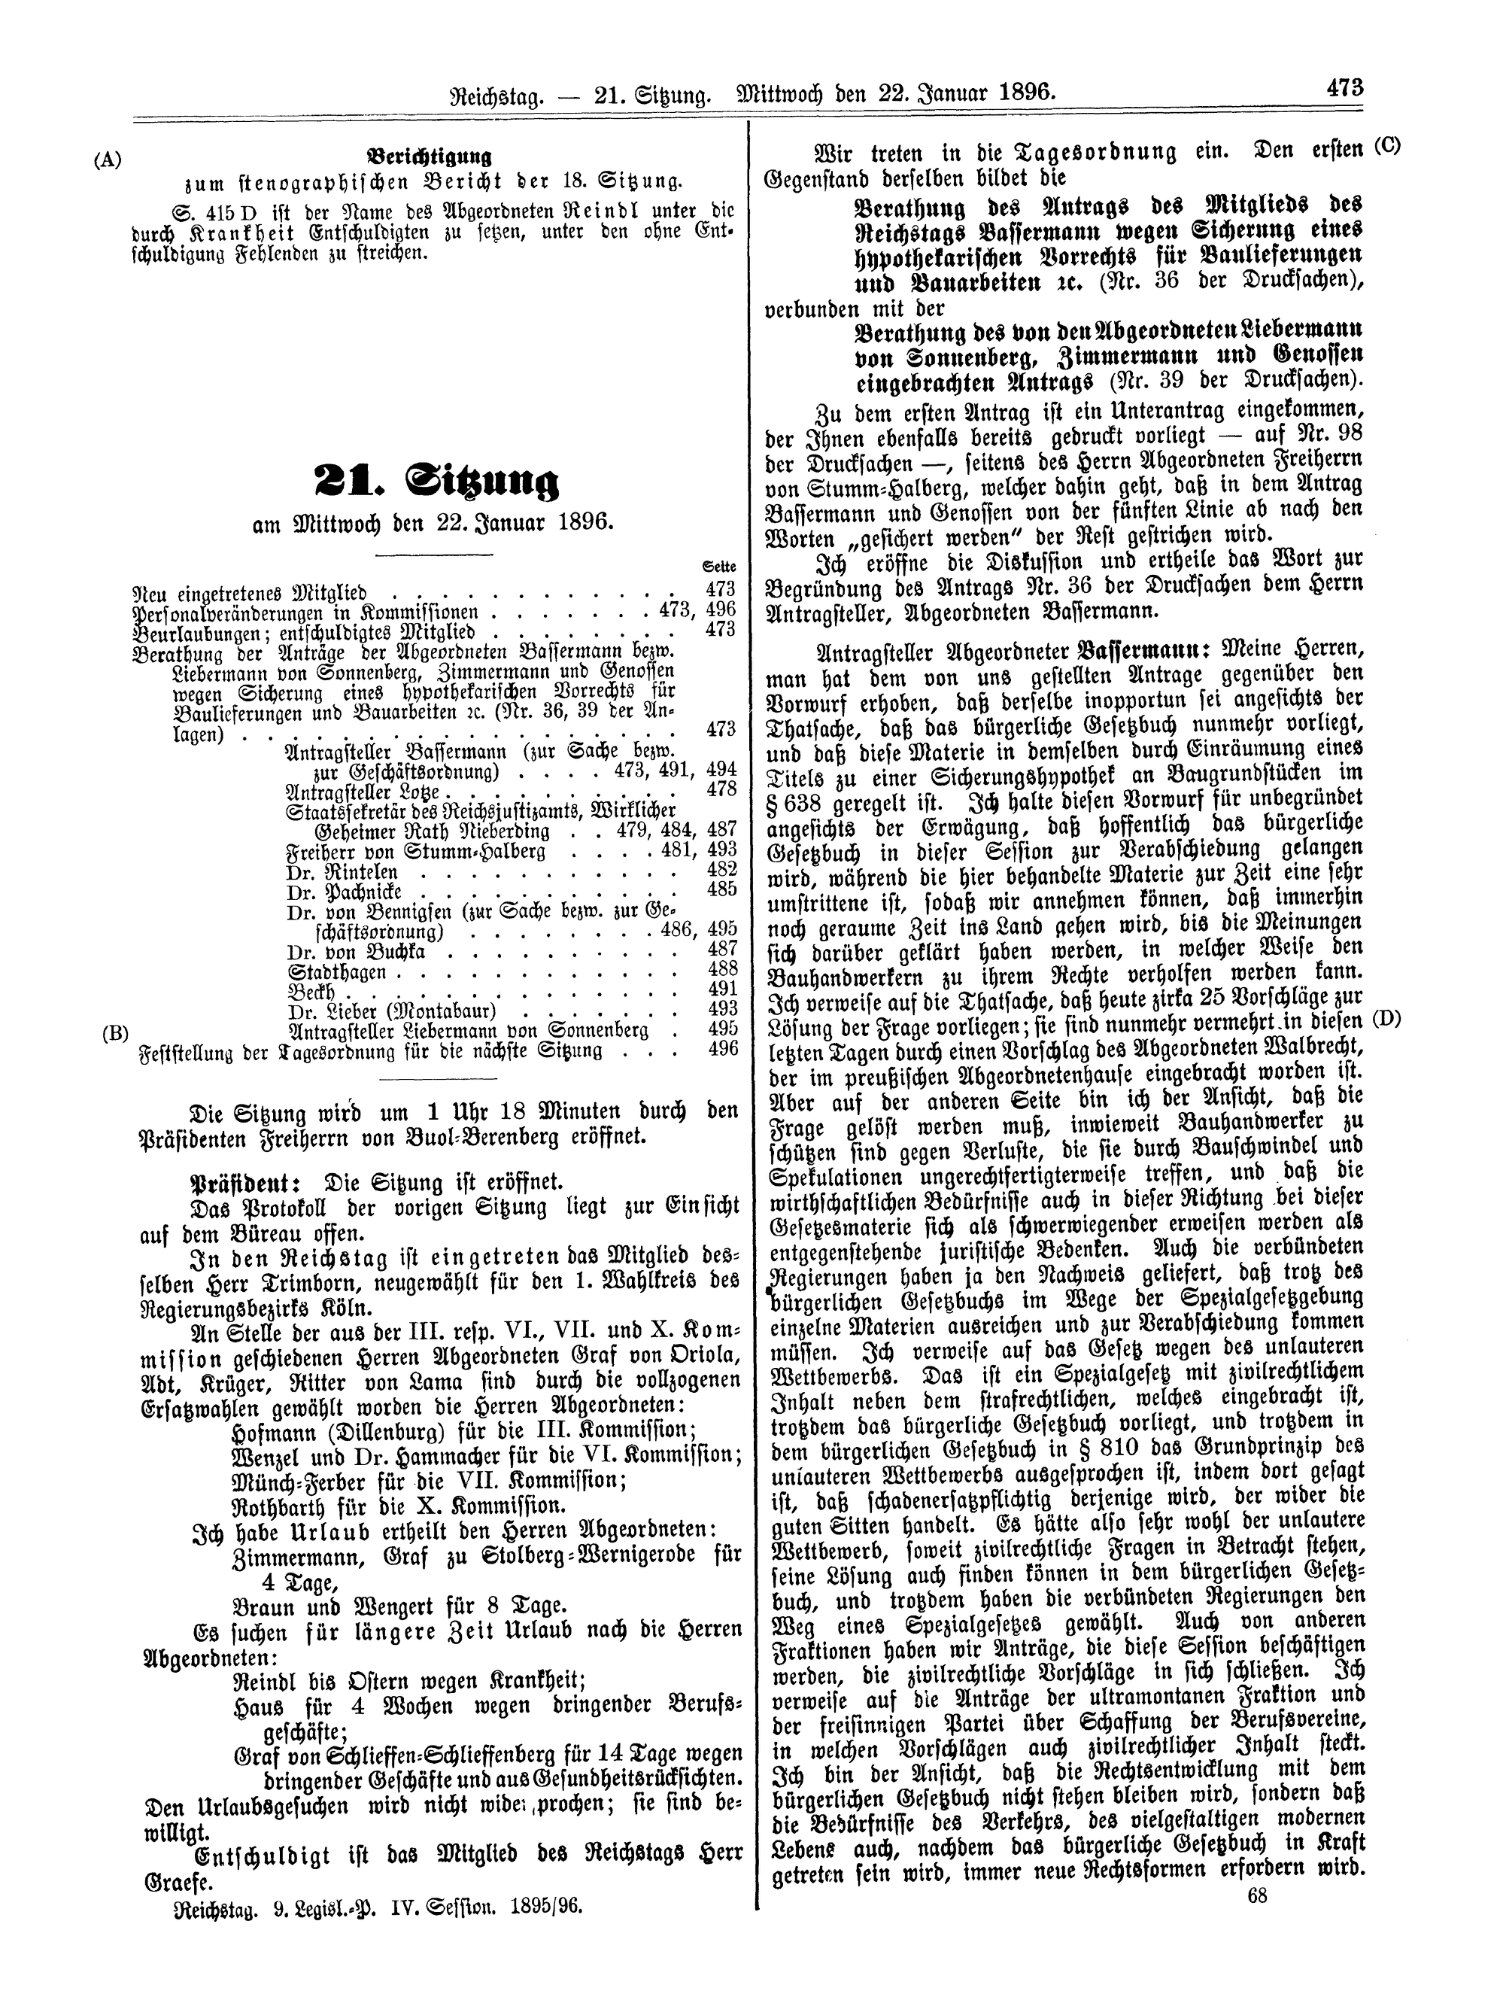 Scan of page 473